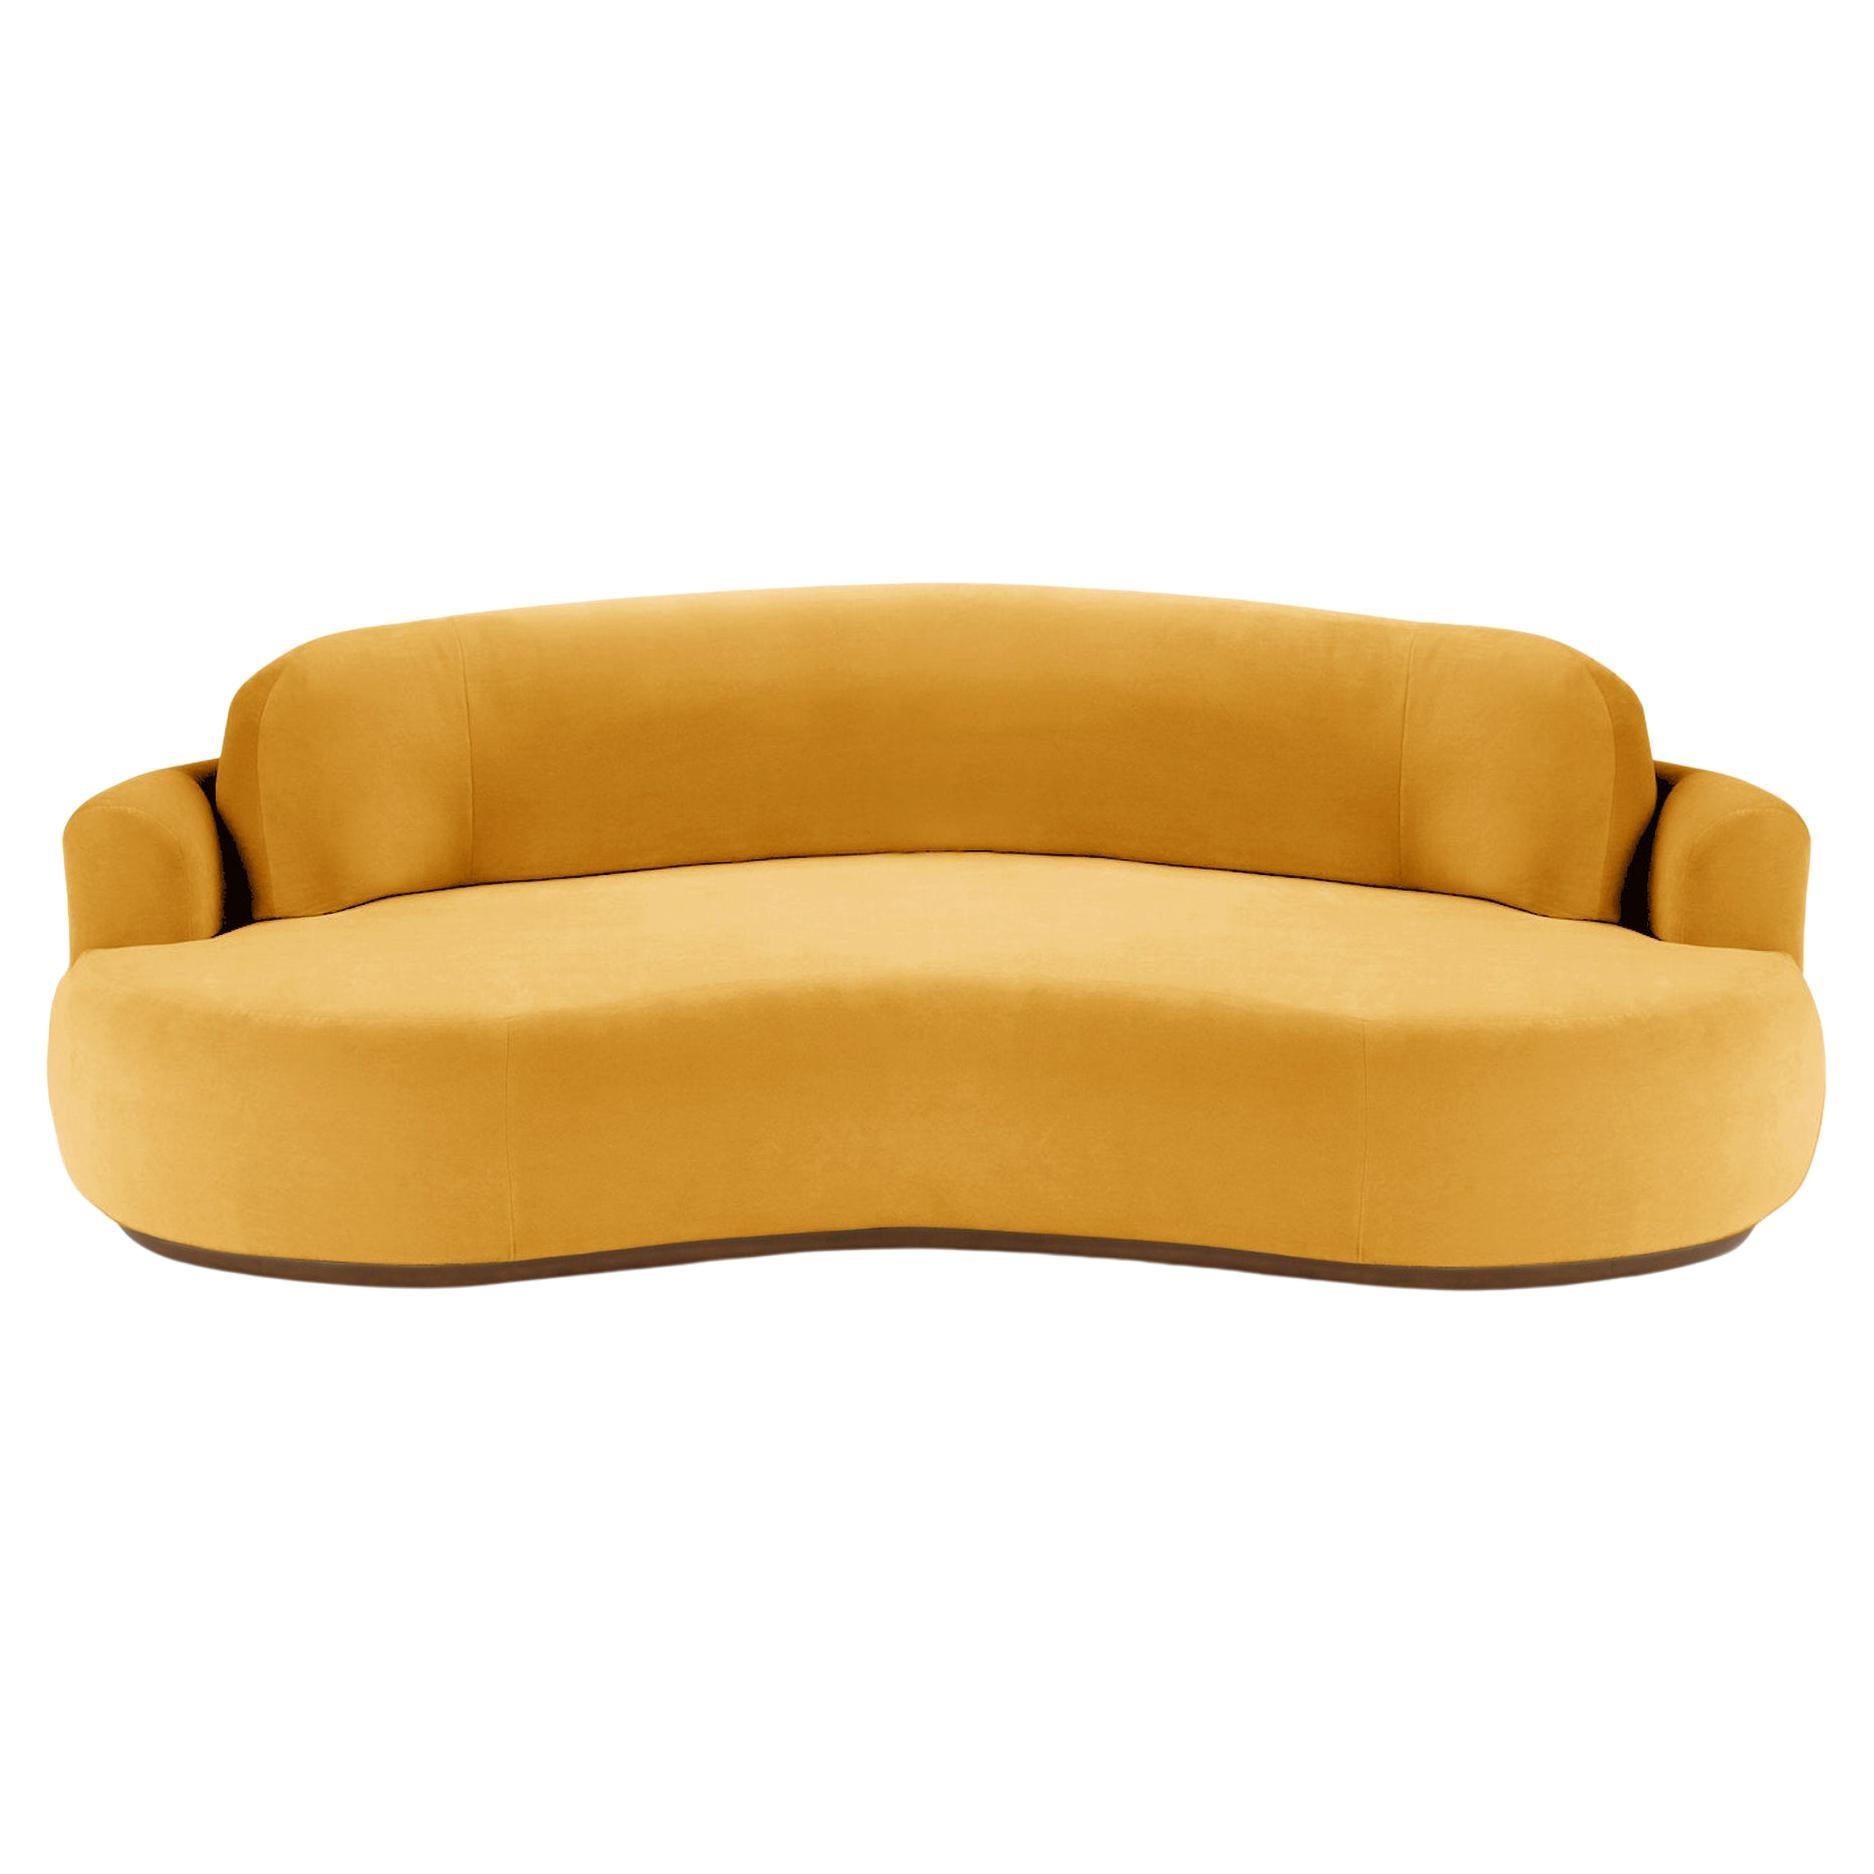 Naked Curved Sofa, Medium with Beech Ash-056-1 and Corn